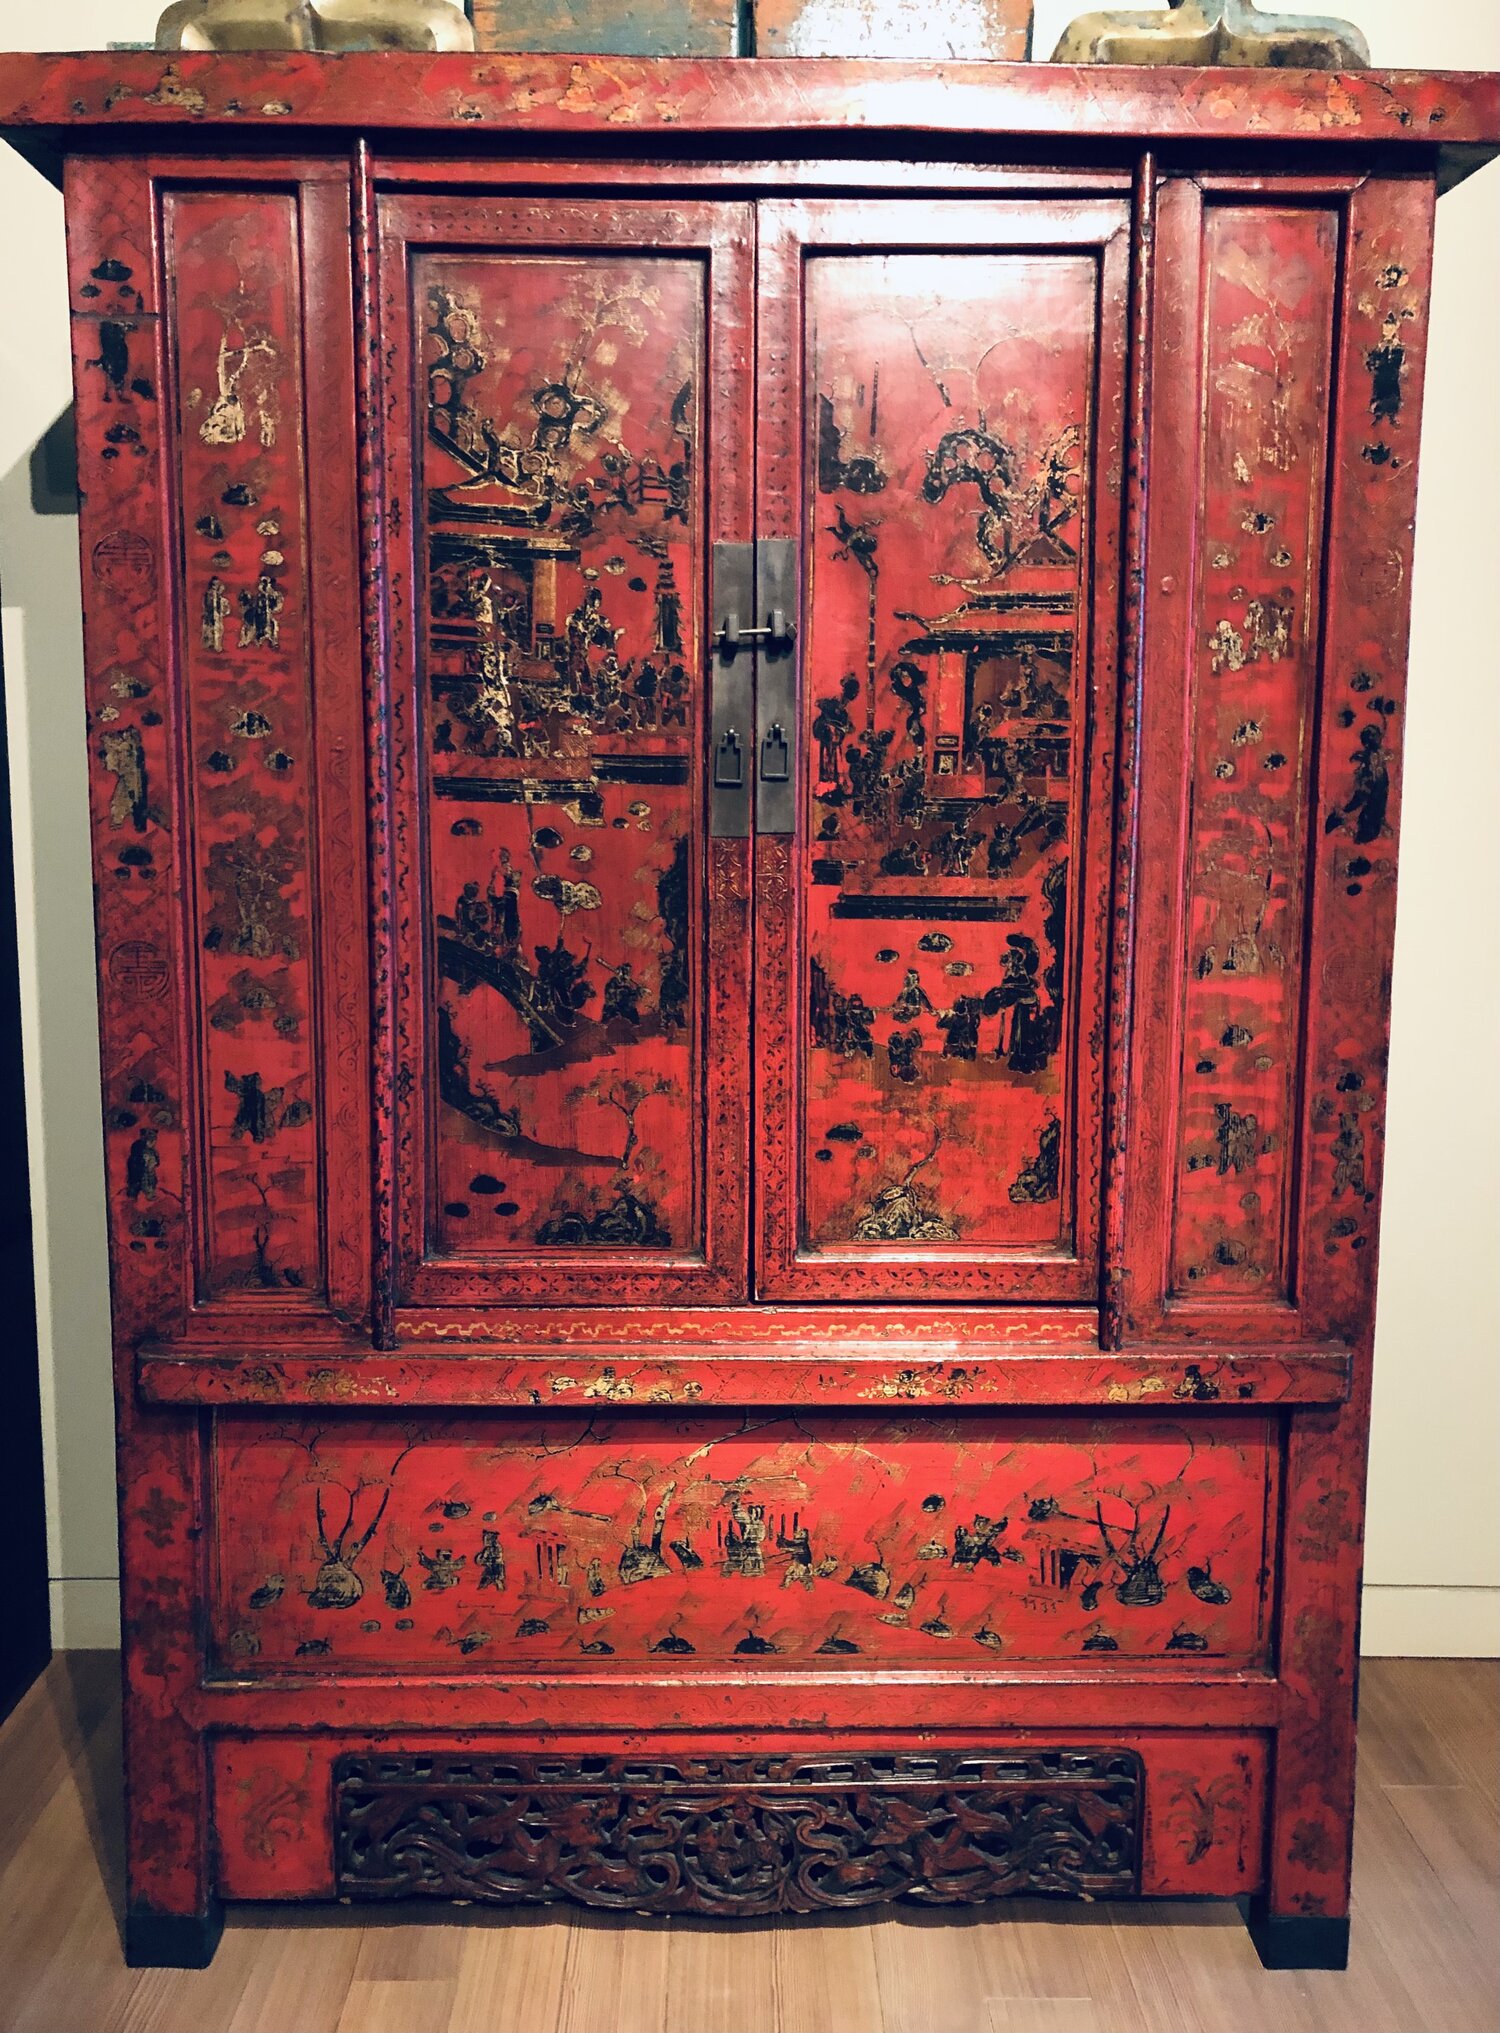 Priceless: Antique Japanese & Chinese Furniture — ASIATICA